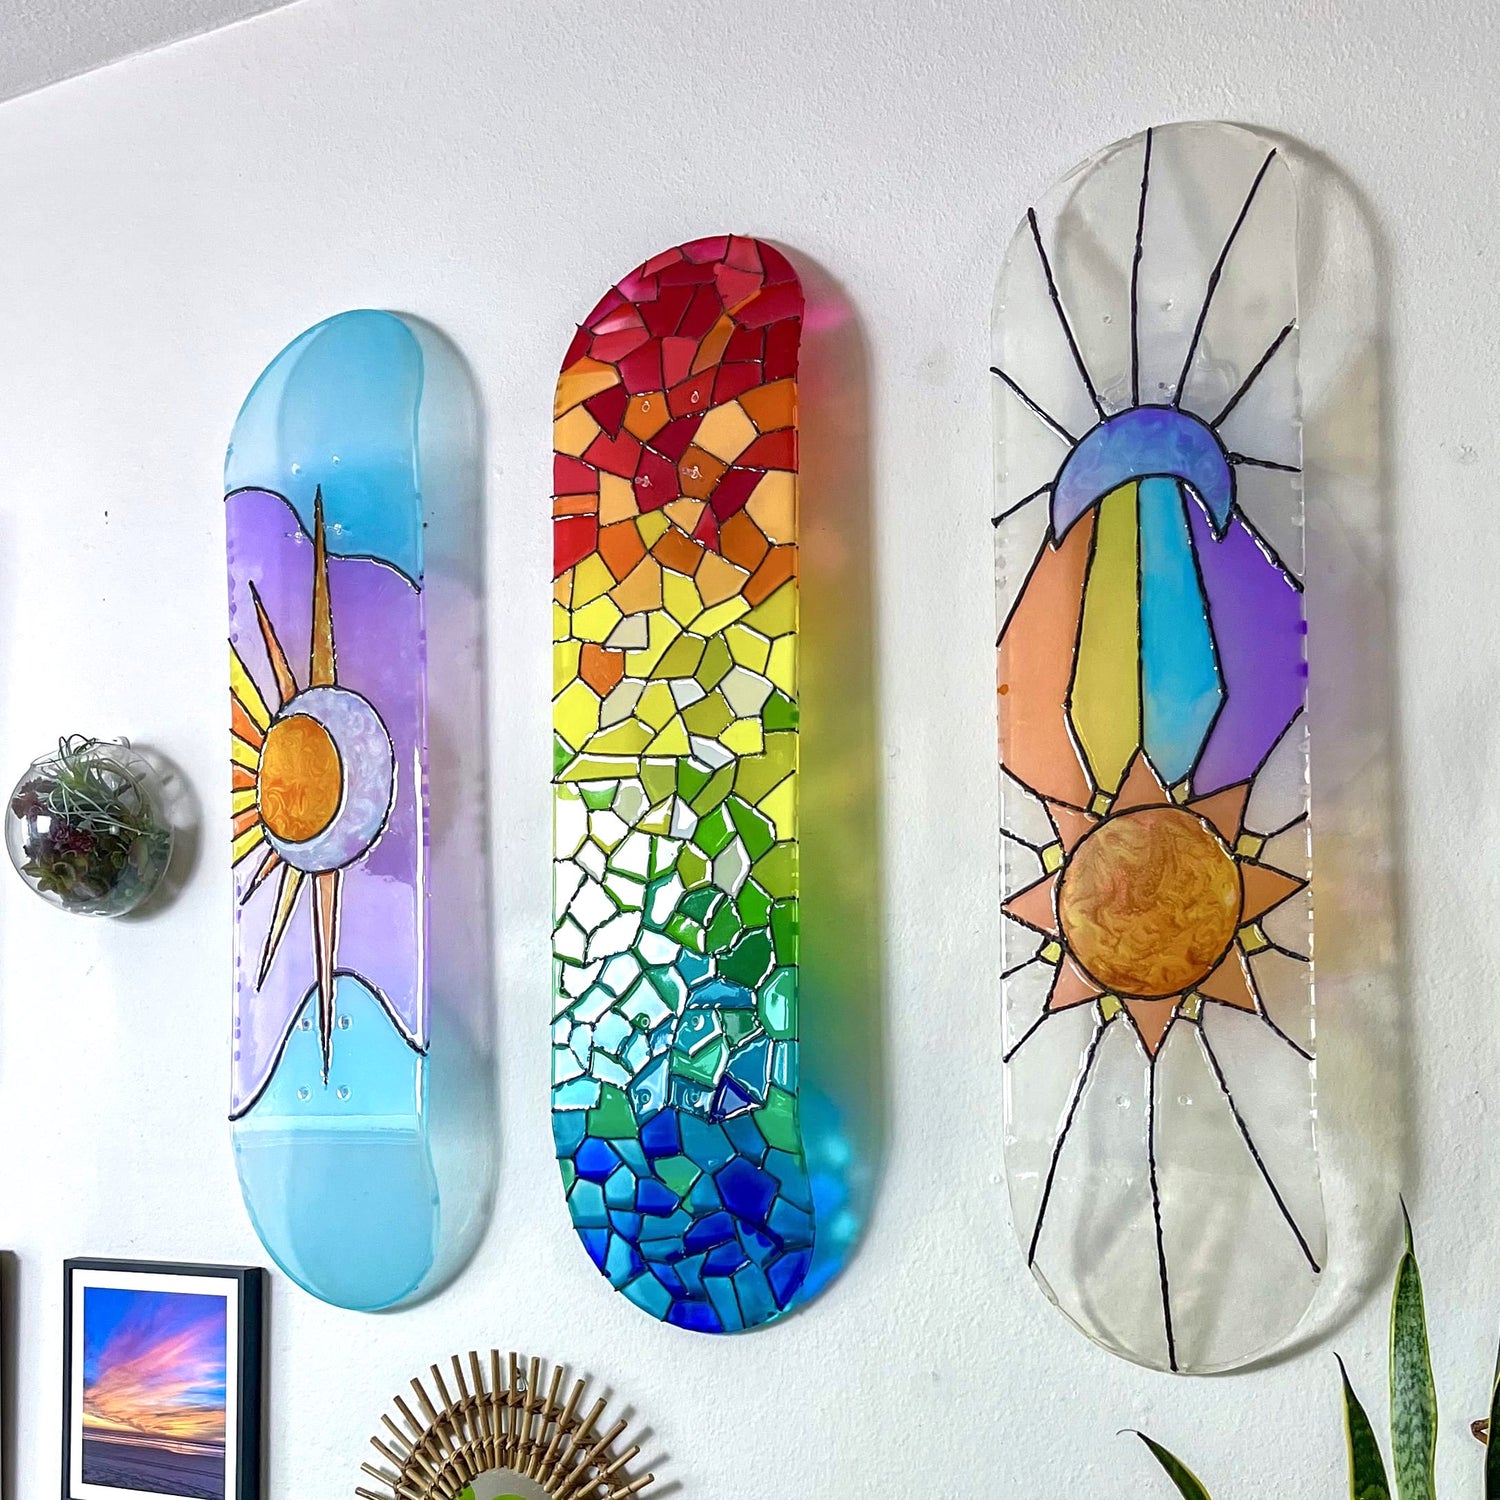 Three piece artwork of see-through stained glass resin skateboard decks hanging on wall casting colorful shadows.